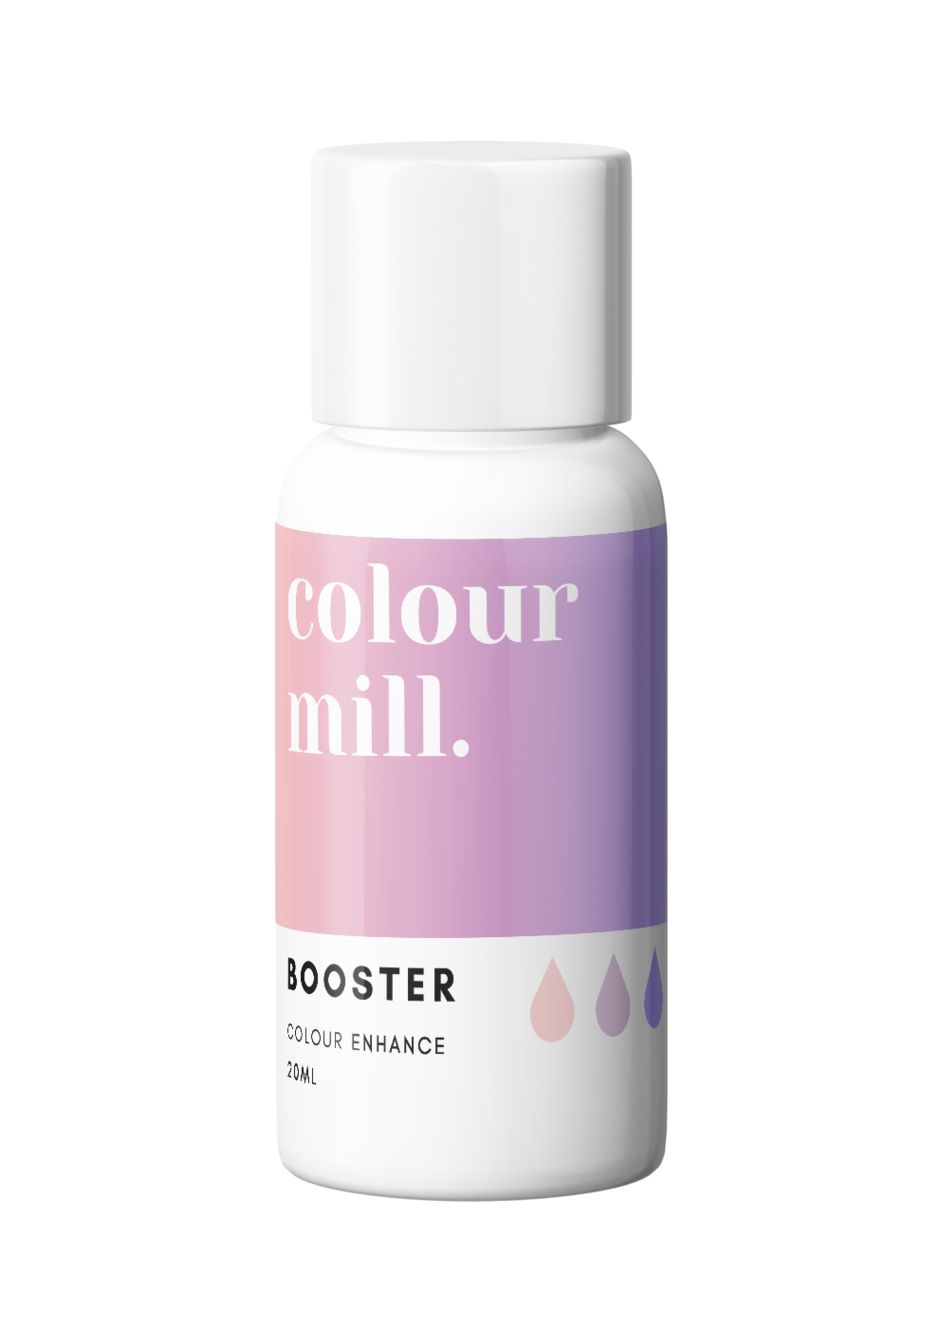 Booster, 20ml, Colour Mill Oil Based Colouring